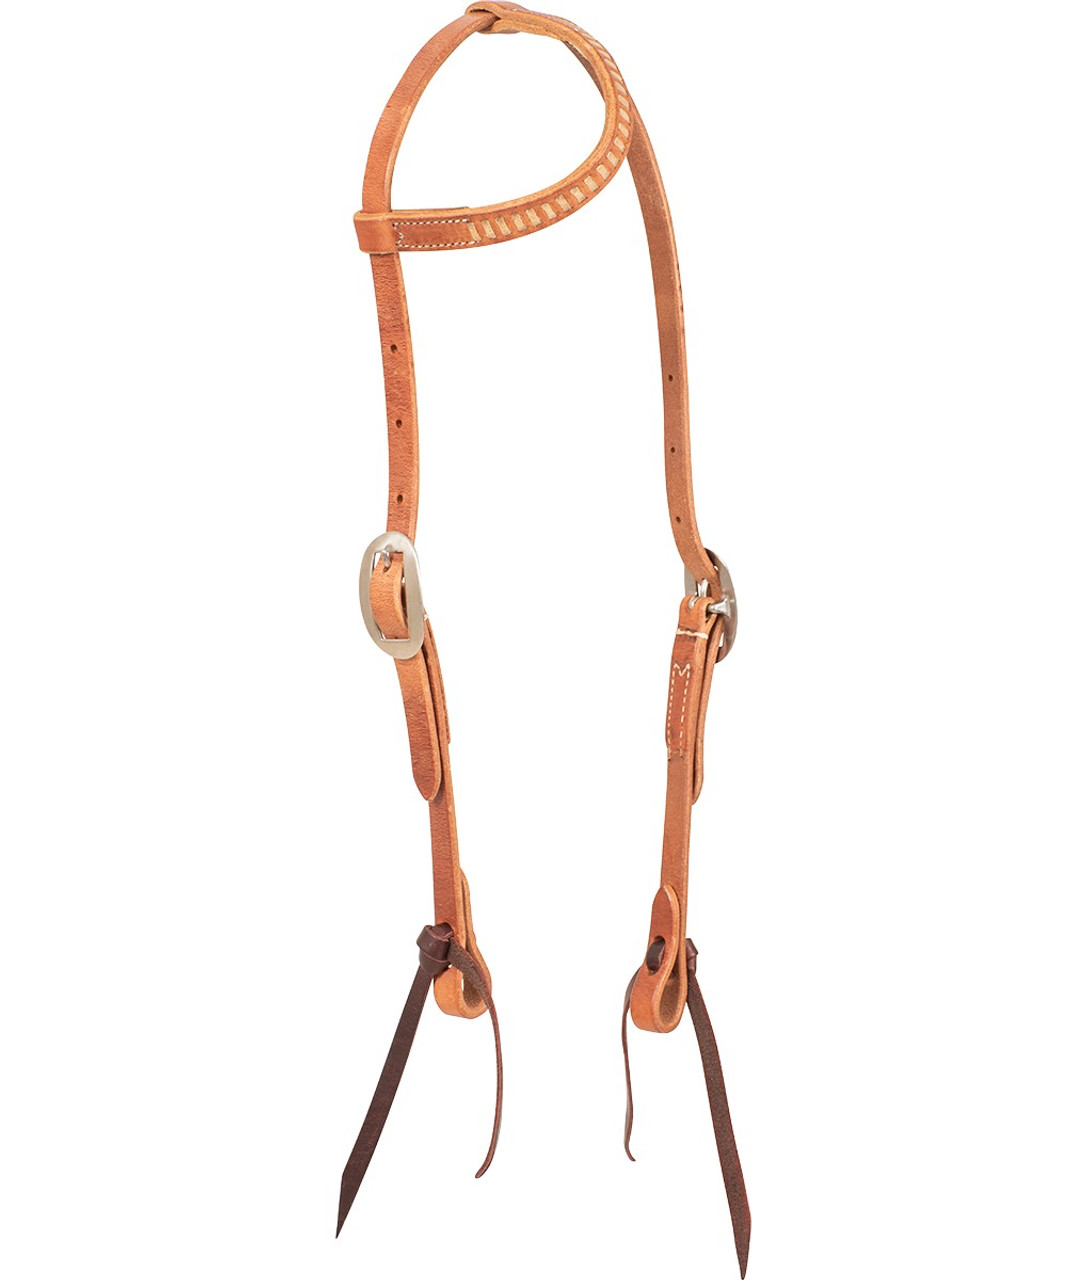 Western Horse Hair on Leather Tack Set One Ear Bridle + Breast